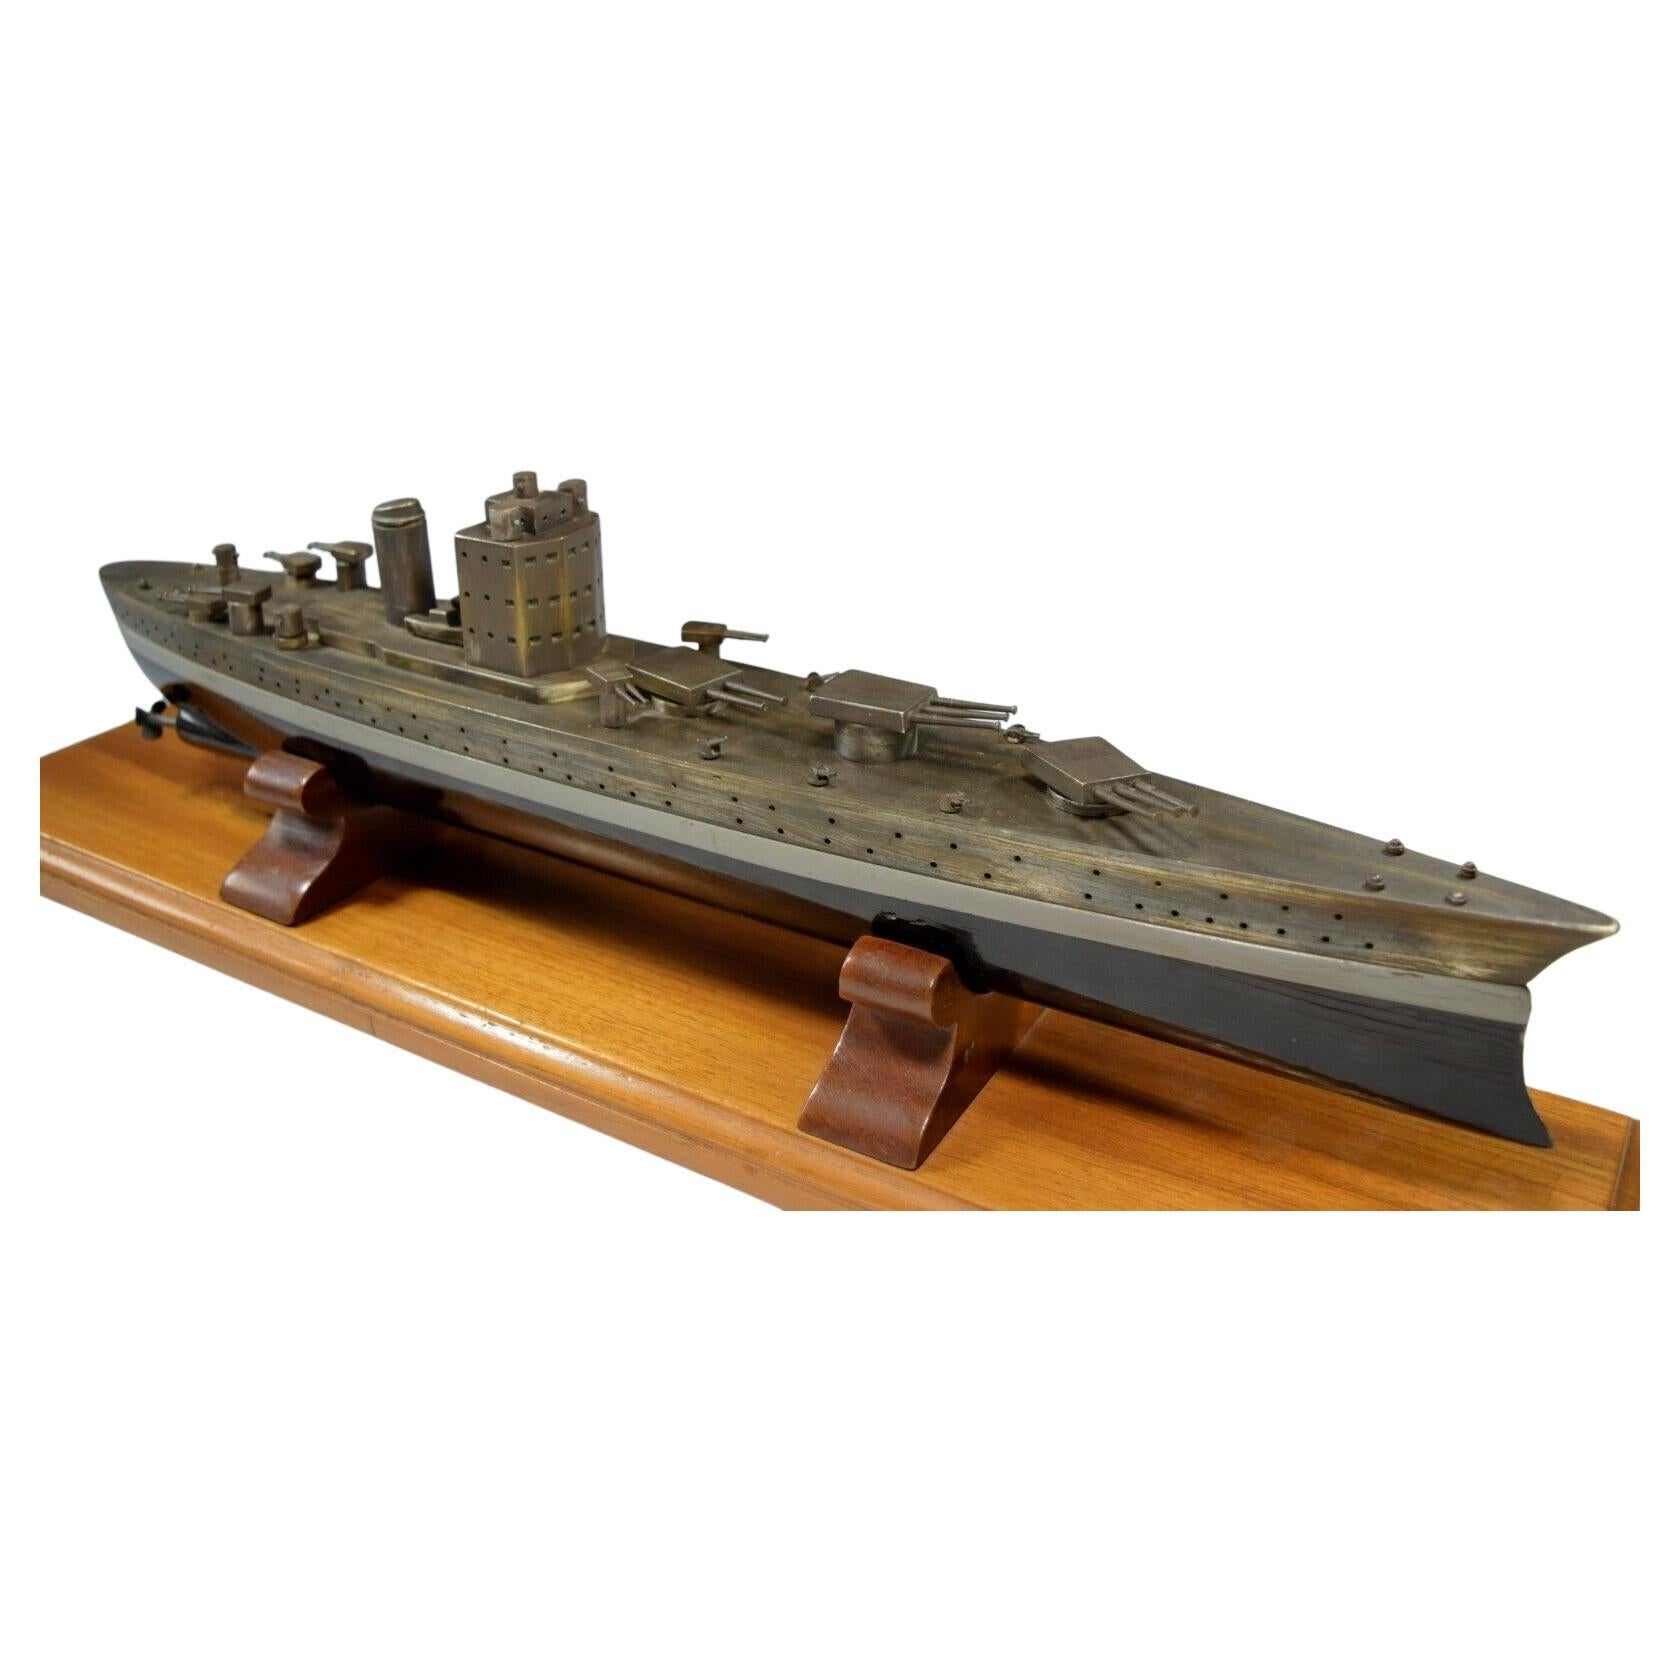 Exceptional Battleship Model,  HMS Nelson, made of bronze or brass and wood. This is a big model, and believed to be of  the HMS Nelson or a Nelson class battleship, which were built in 1923 & used during the World War II. The guns swivel along with